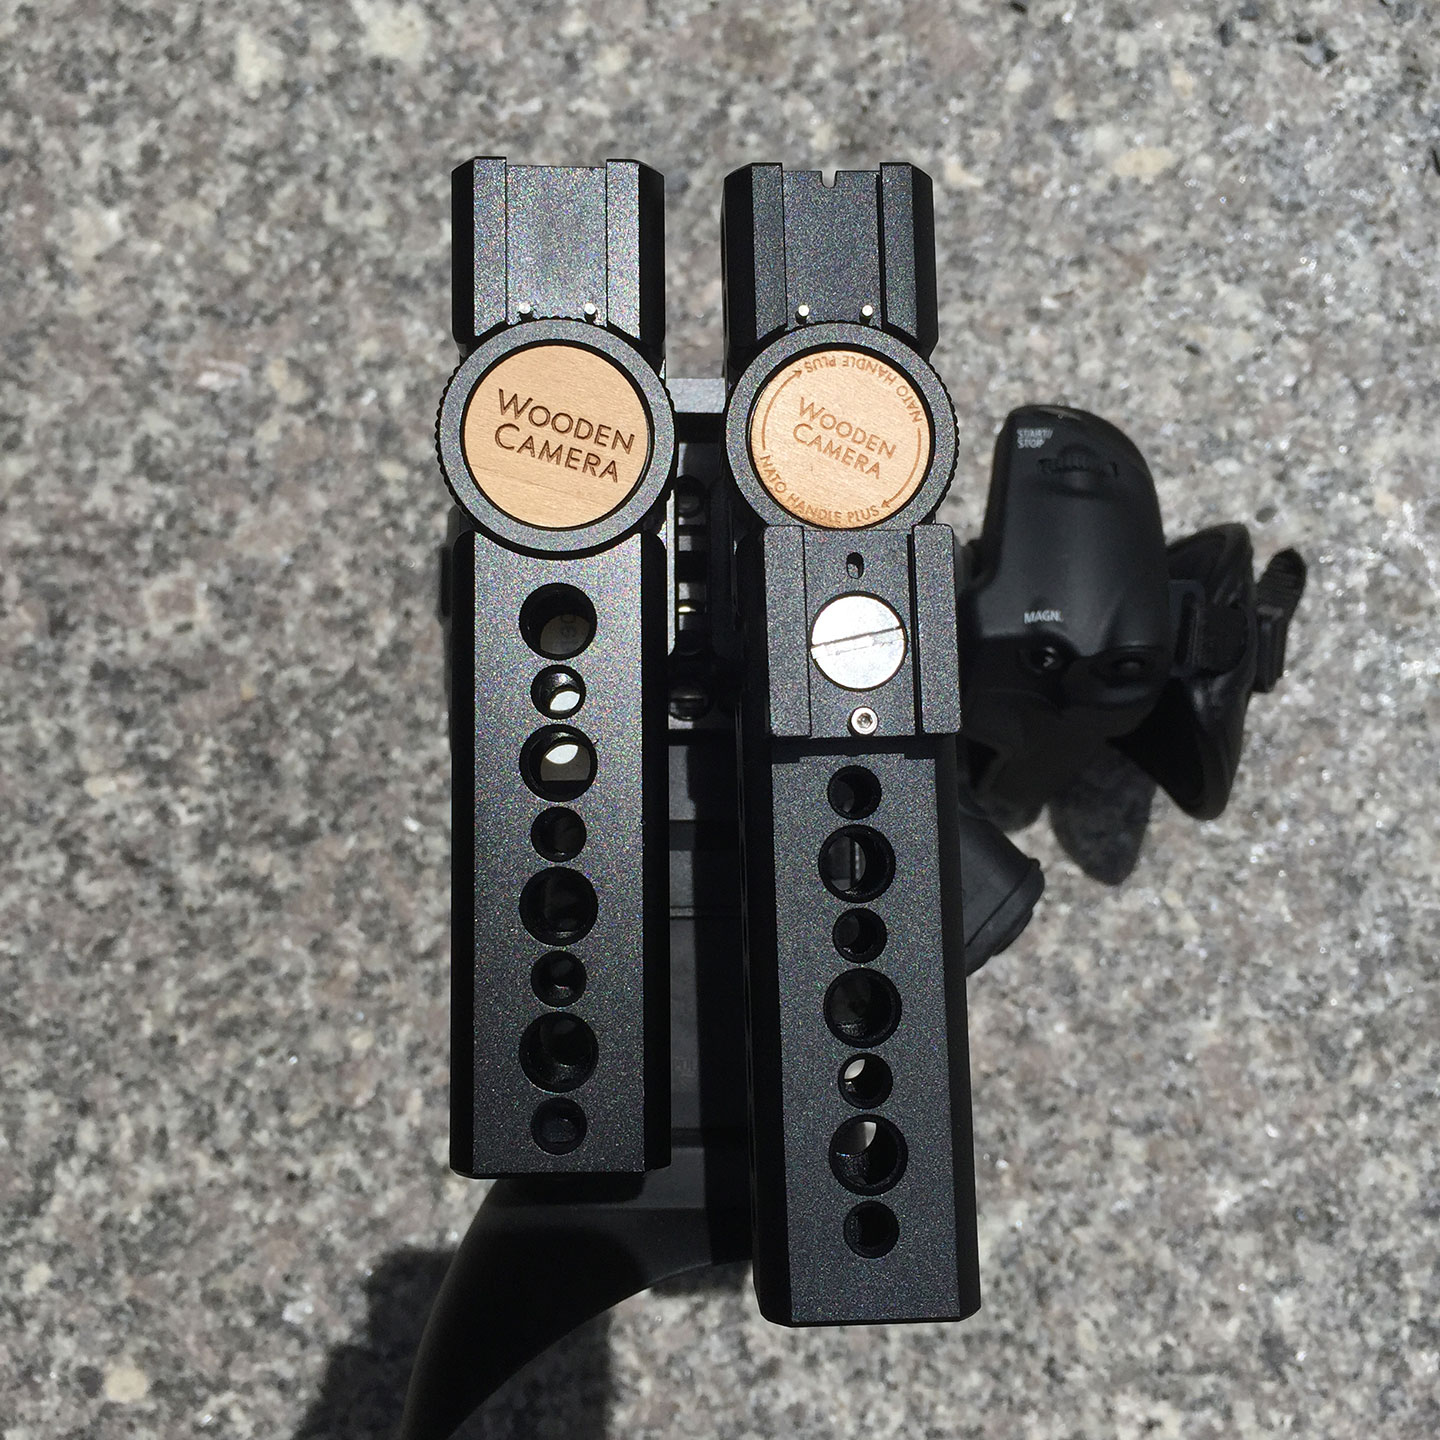 Top view of a Wooden Camera NATO Handle (Plus) old vs. new version. The new version has an Universal Hot Shoe mounted via guide pin in in the Arri style ⅜" hole.